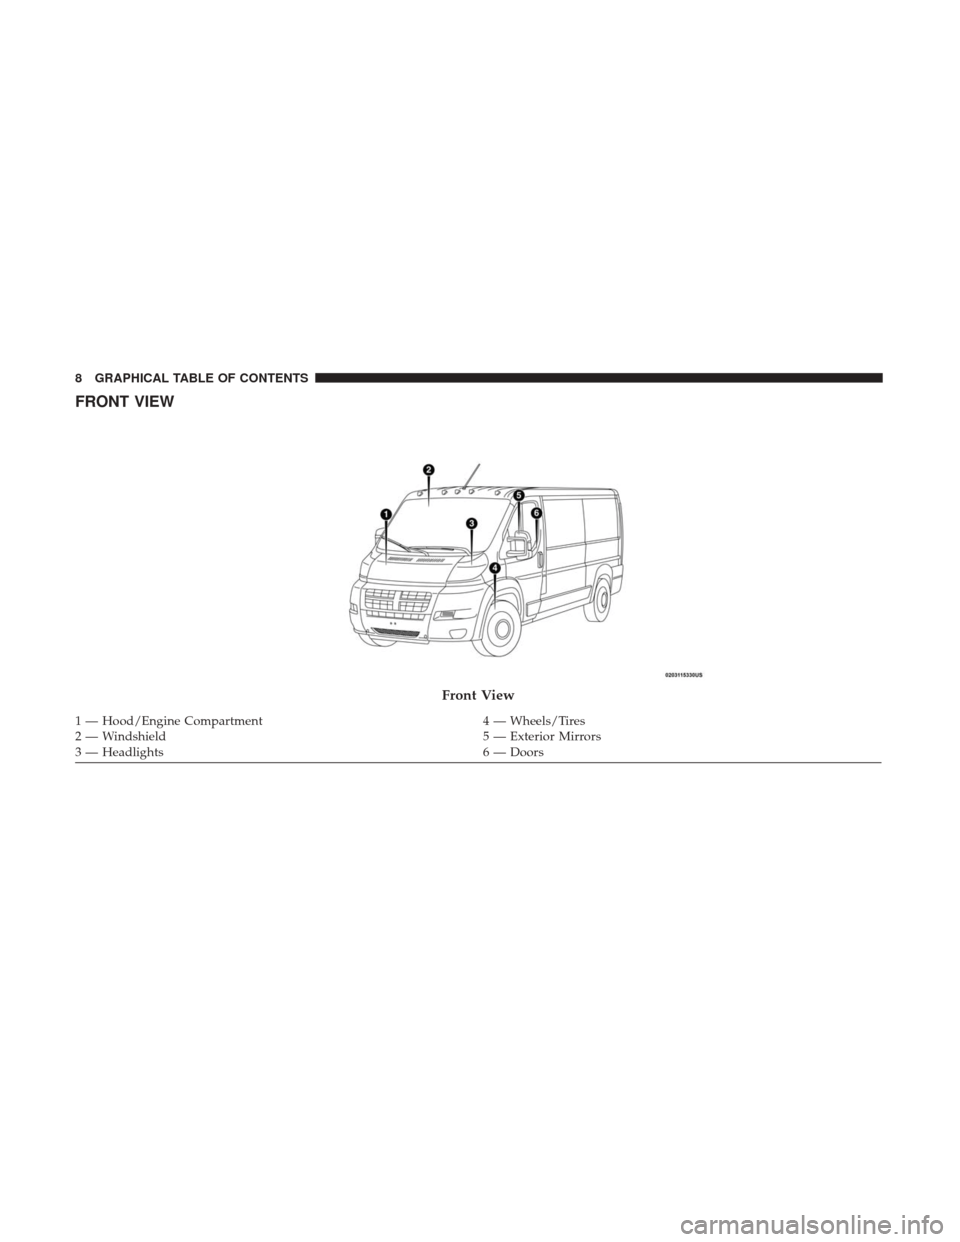 Ram ProMaster 2018  Owners Manual FRONT VIEW
Front View
1 — Hood/Engine Compartment4 — Wheels/Tires
2 — Windshield 5 — Exterior Mirrors
3 — Headlights 6 — Doors
8 GRAPHICAL TABLE OF CONTENTS 